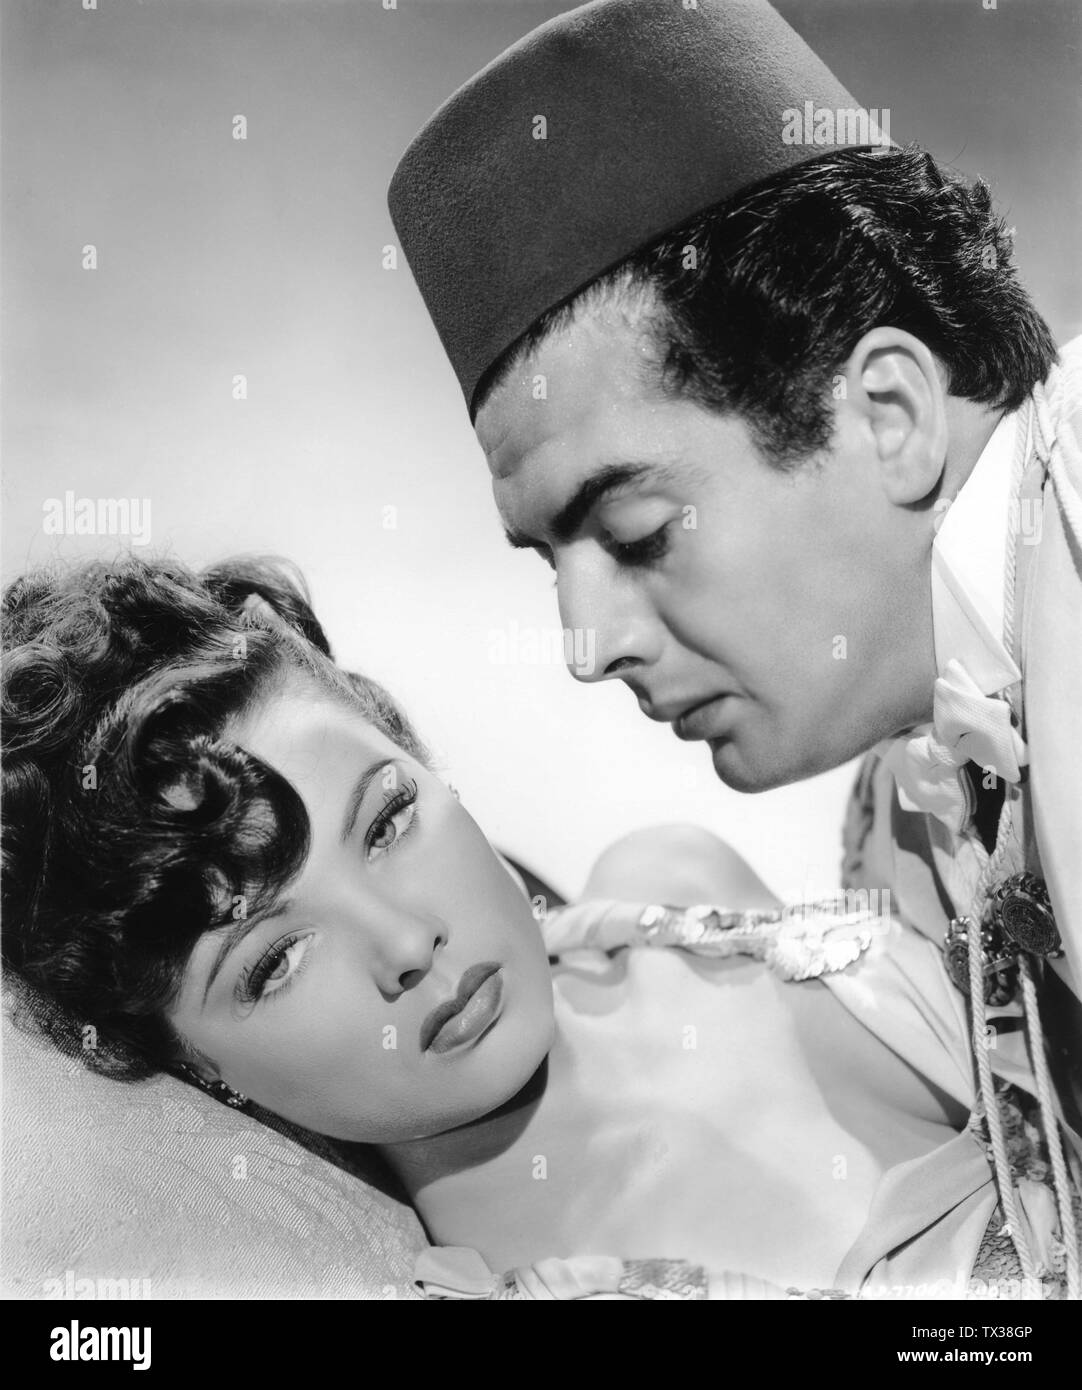 GENE TIERNEY as Poppy and VICTOR MATURE Doctor Omar in THE SHANGHAI GESTURE 1941 director Josef von STERNBERG producer Arnold Pressburger Films / United Artists Stock Photo